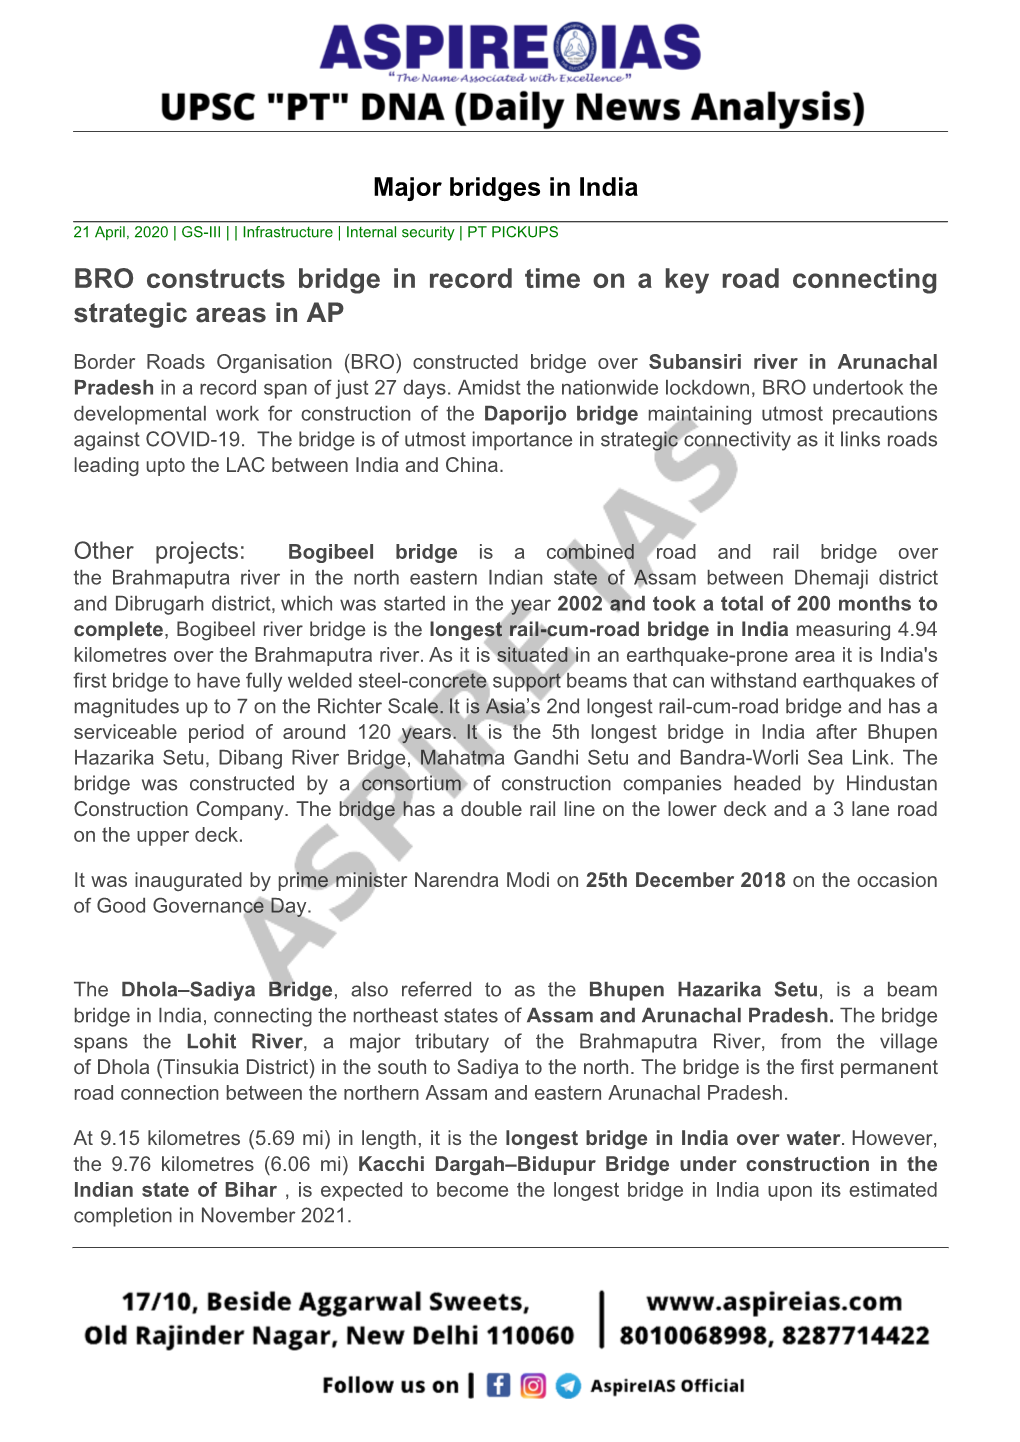 BRO Constructs Bridge in Record Time on a Key Road Connecting Strategic Areas in AP